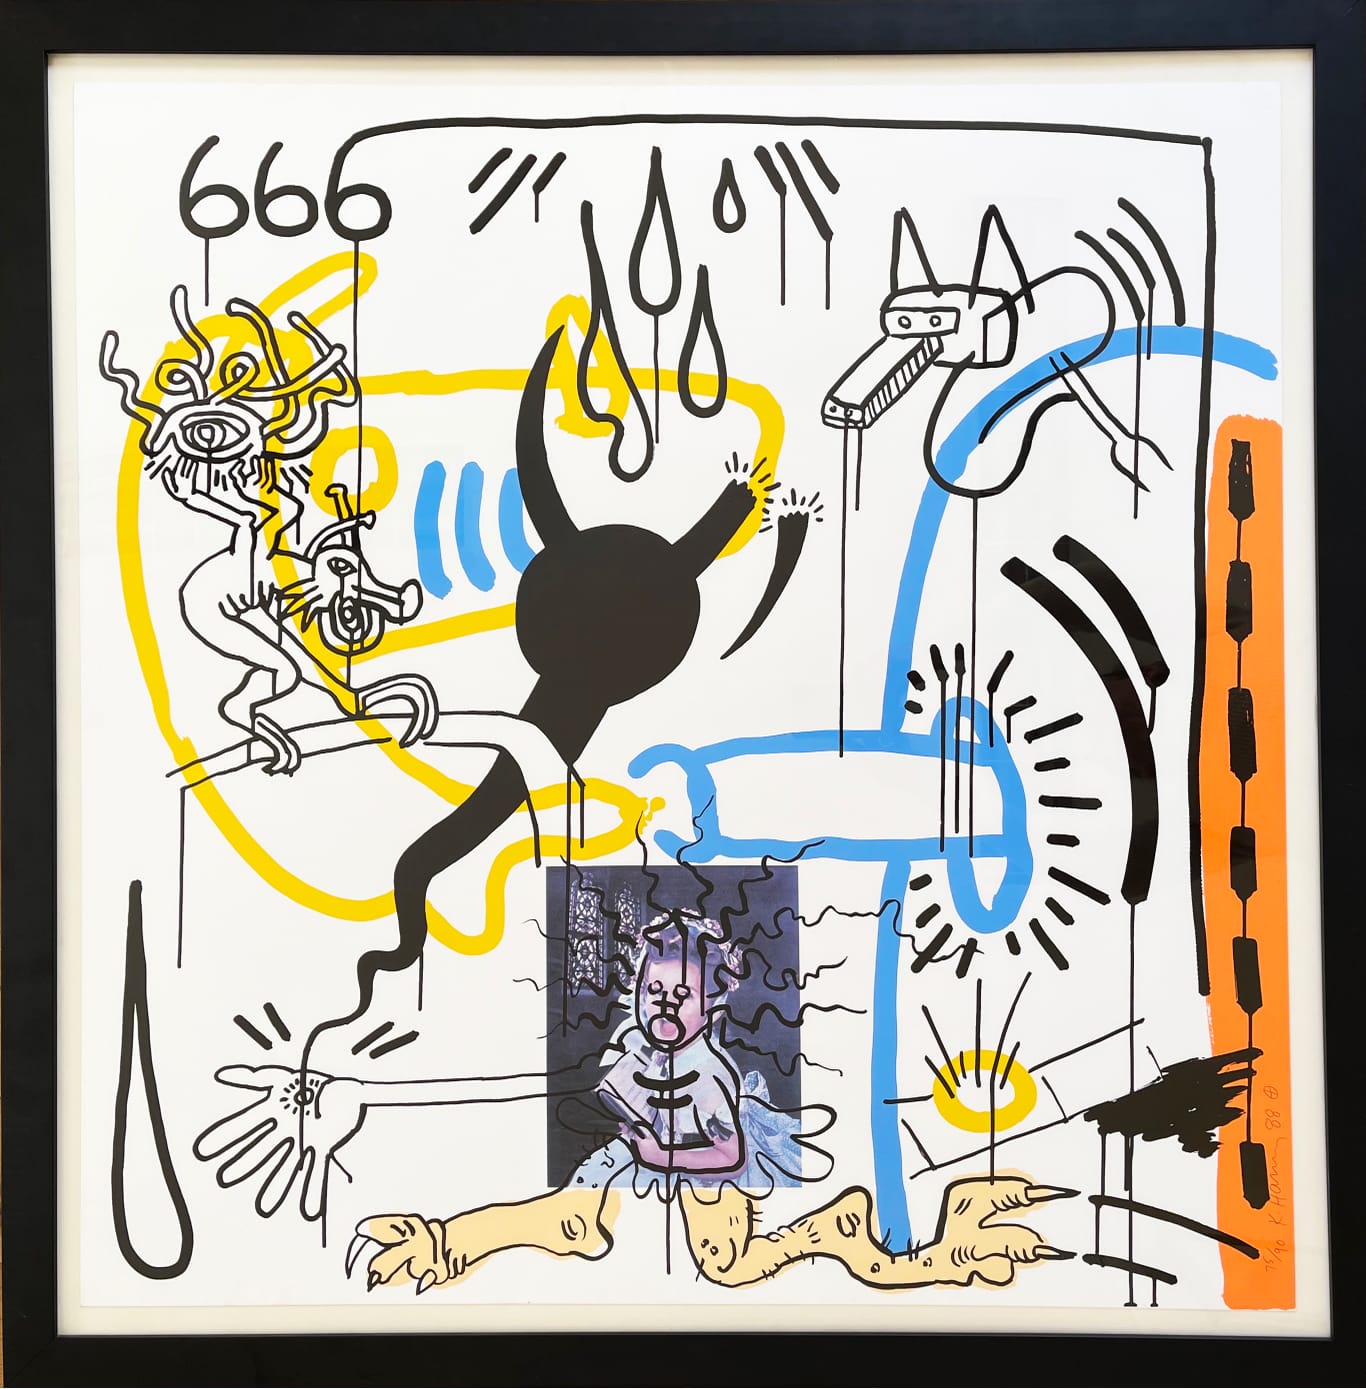 Keith Haring - Apocalypse 8 from the Apocalypse series 1988